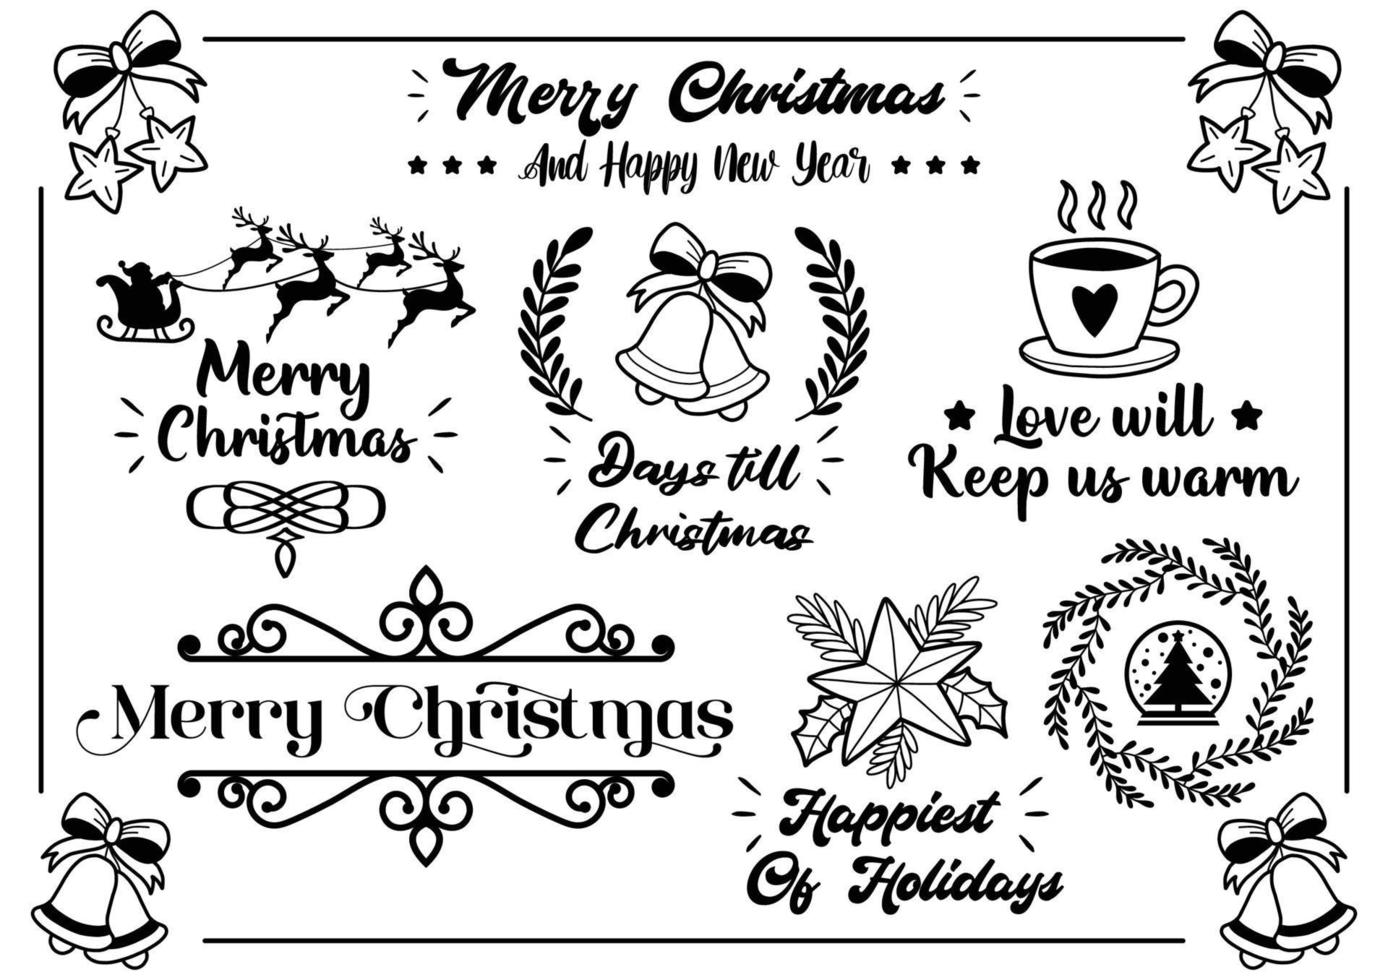 Christmas quote illustration Vector for banner